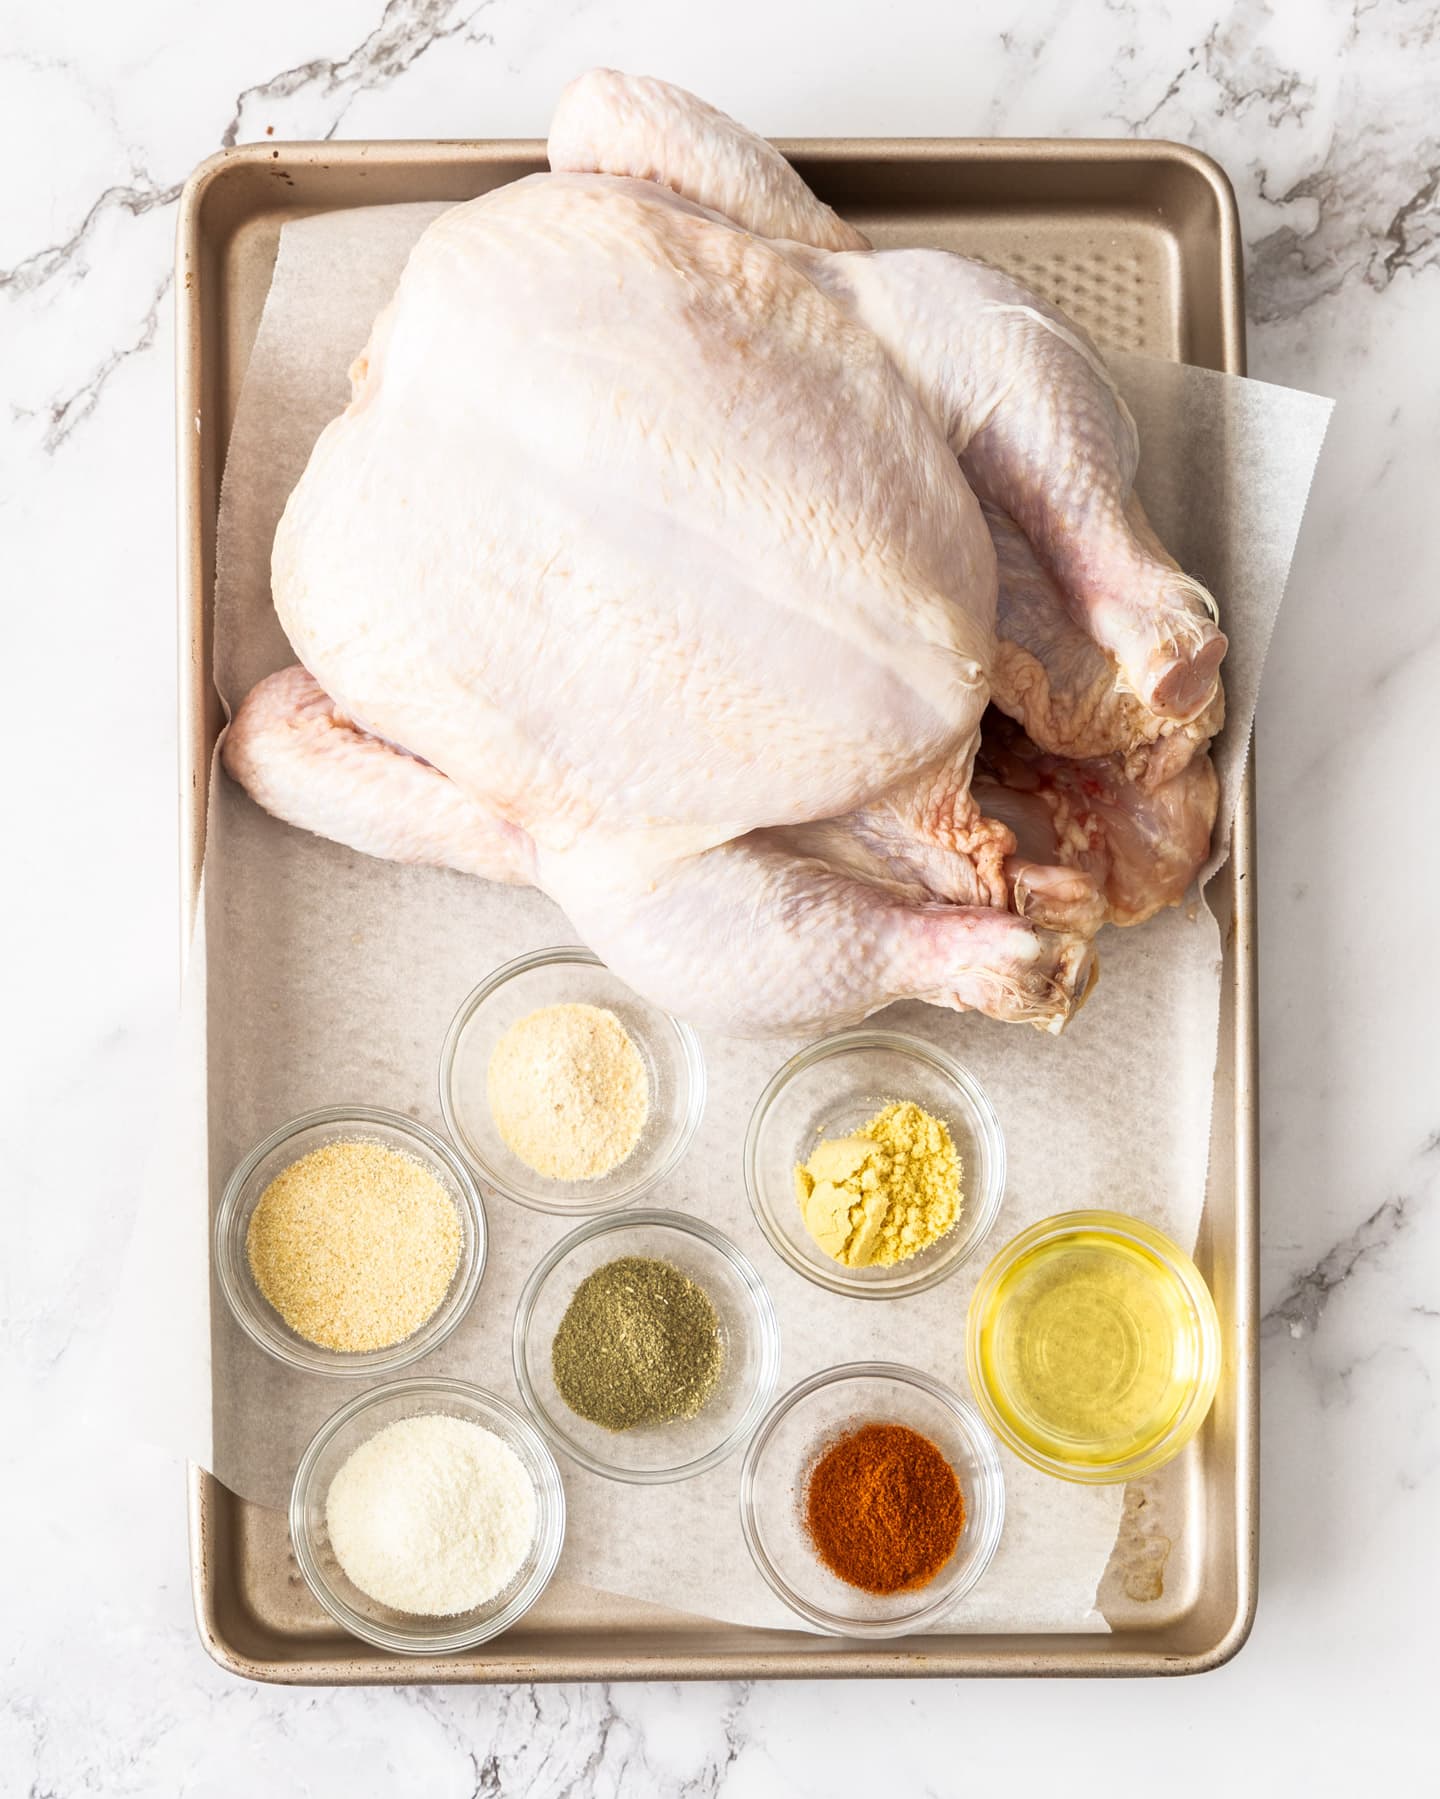 Ingredients for air fryer roast chicken on a baking tray.